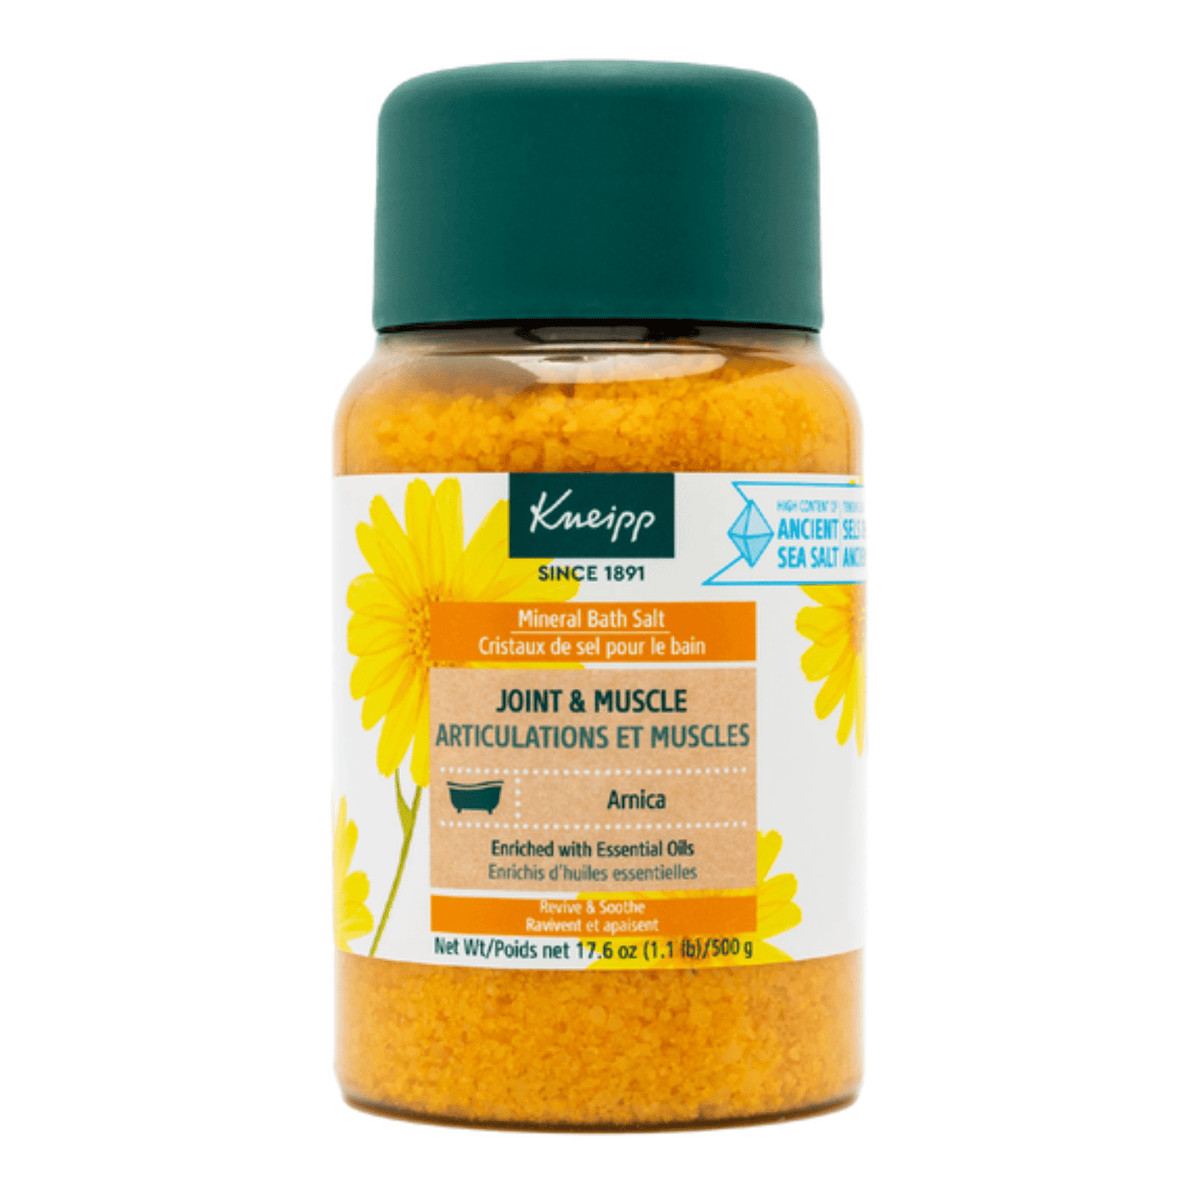 Primary Image of Arnica Joint & Muscle Mineral Bath Salt